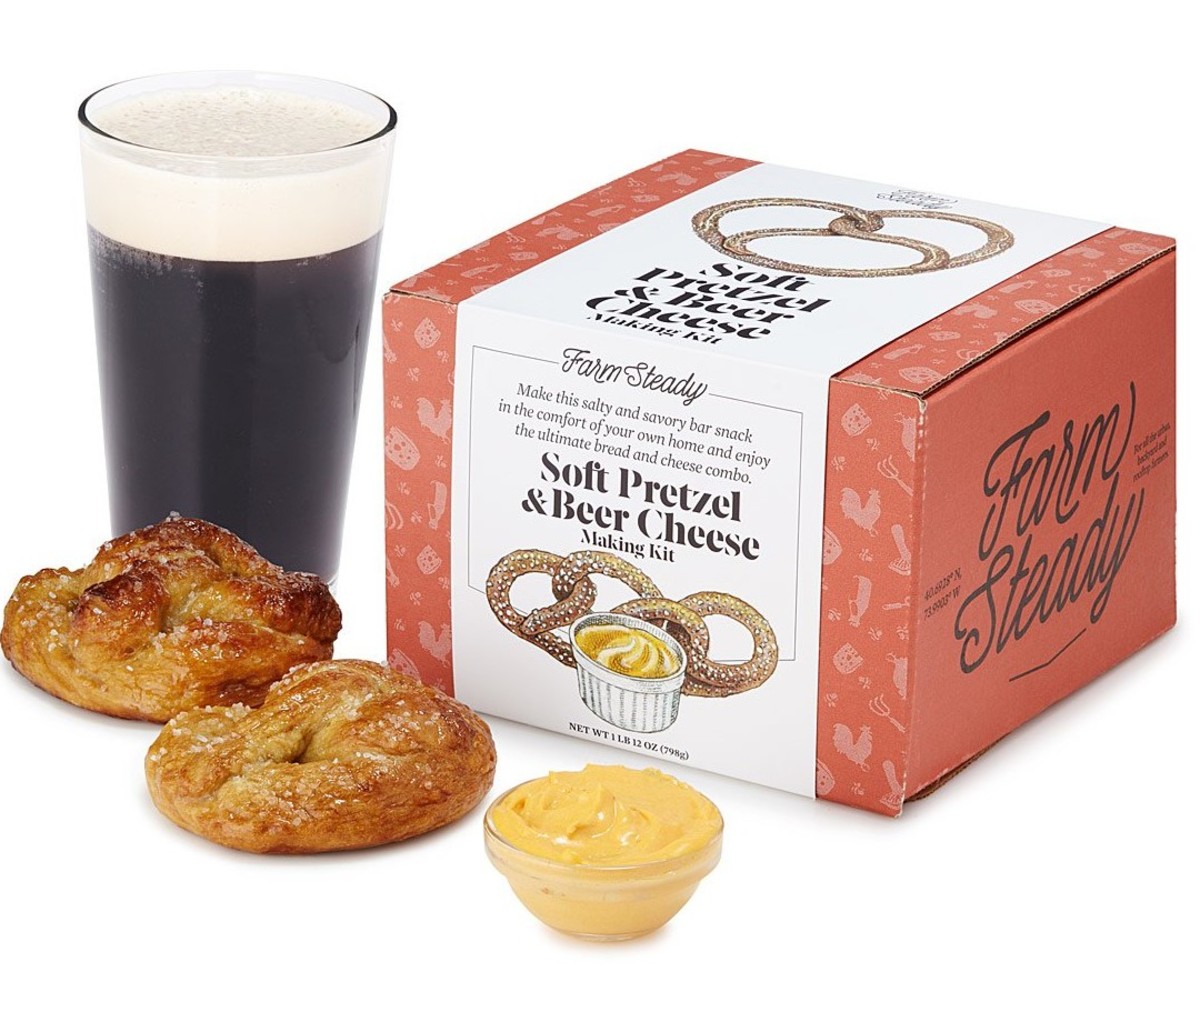 Uncommon Experience's Soft Pretzel & Beer Cheese Making Kit in a box, displayed beside two pretzels, a small bowl of soft cheese and a pint of beer